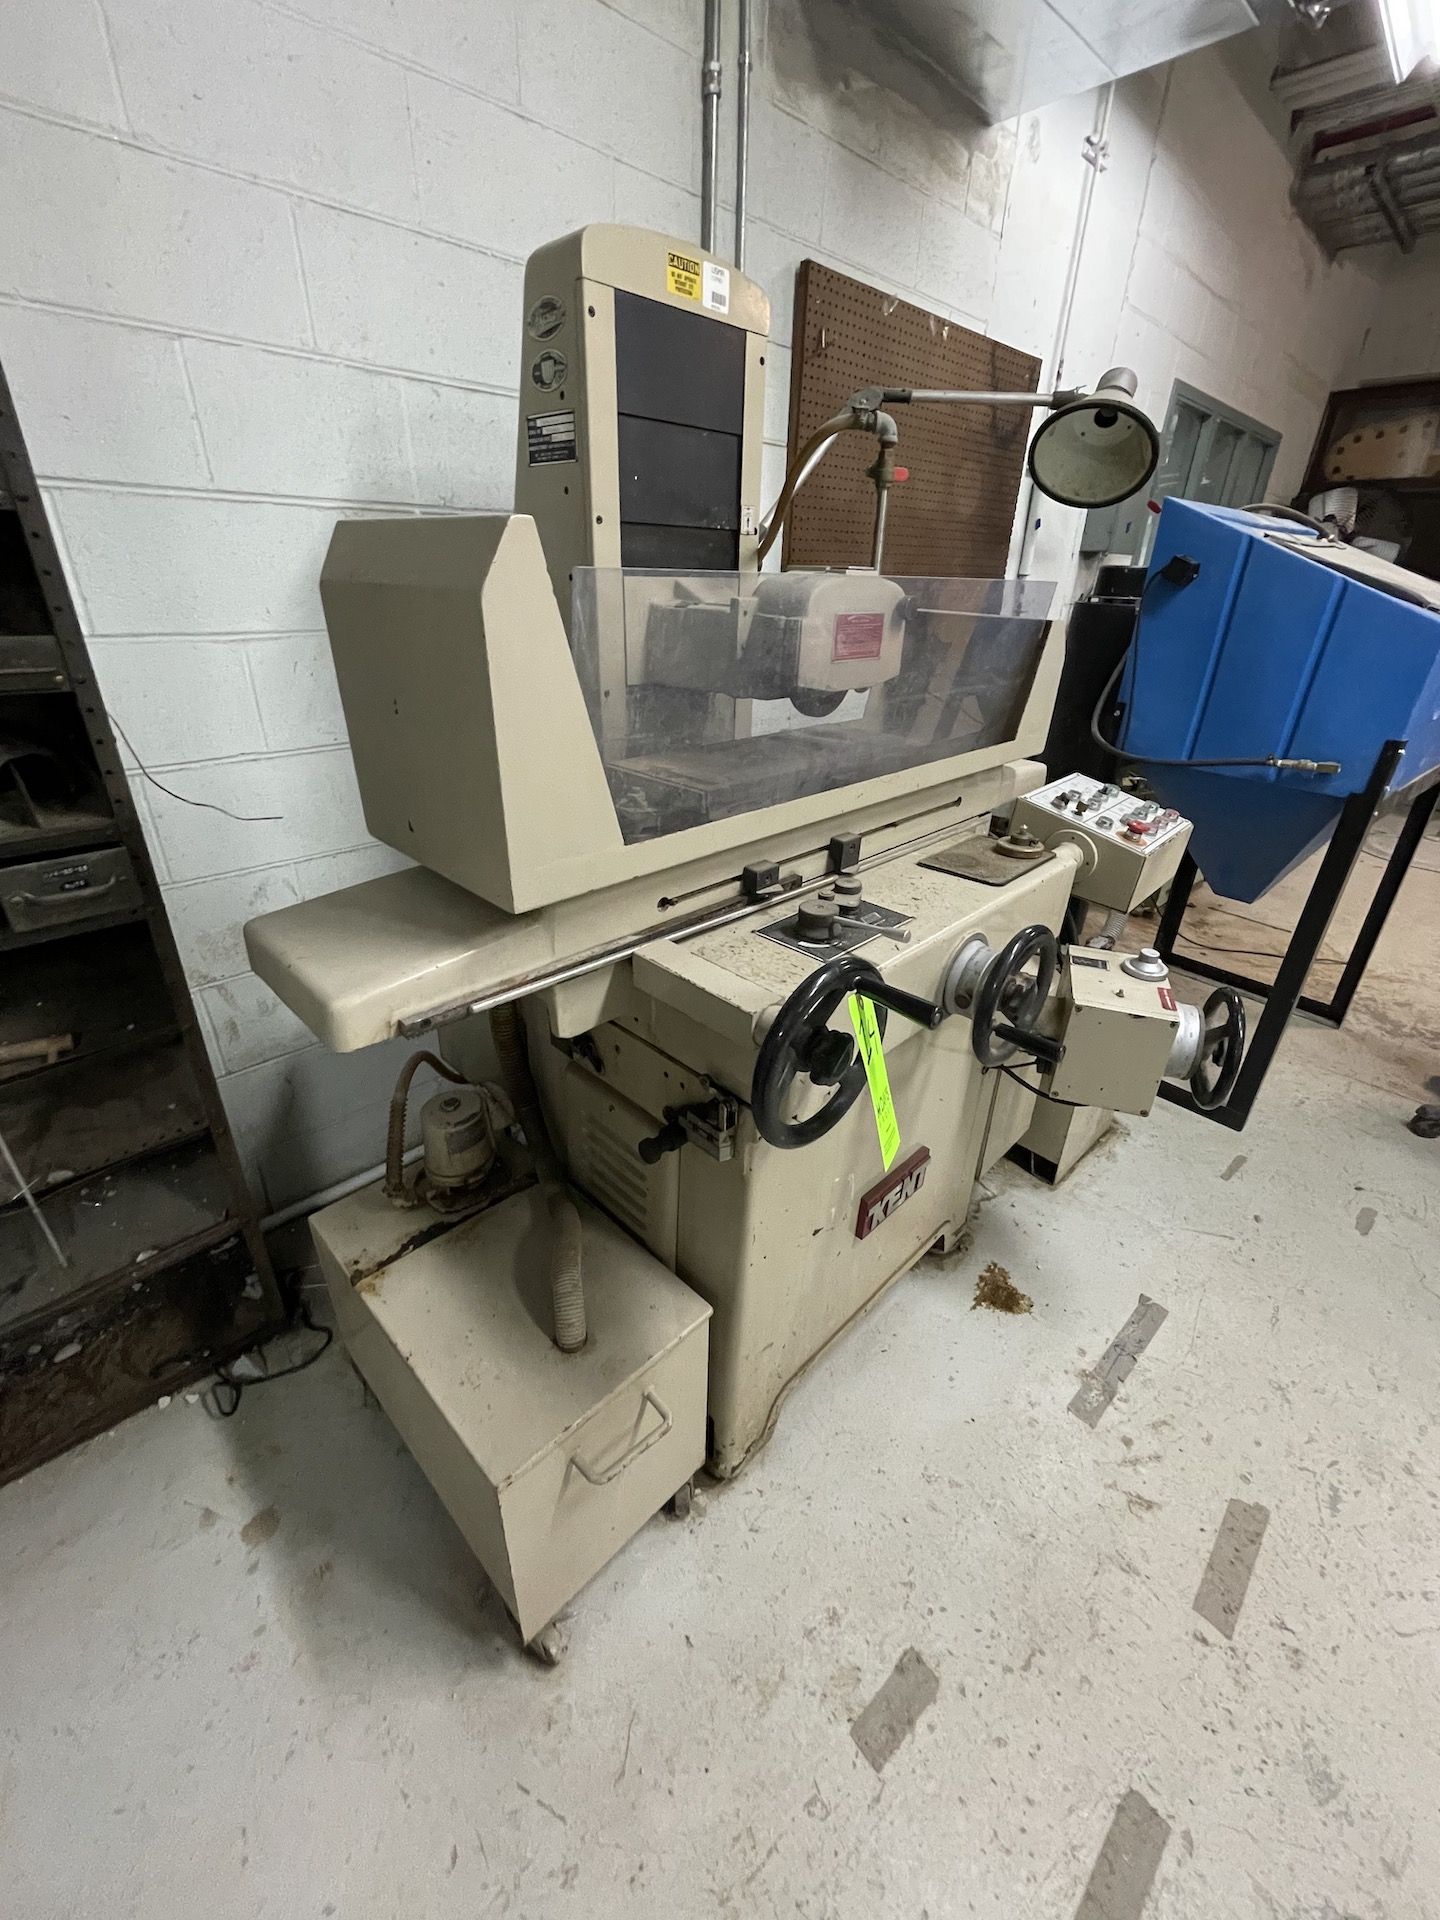 KENT SURFACE GRINDER, MODEL KGS-818AHD, S/N 85010501, INCLUDES 1 HP MOTOR (Non-Negotiable Rigging, - Image 7 of 12